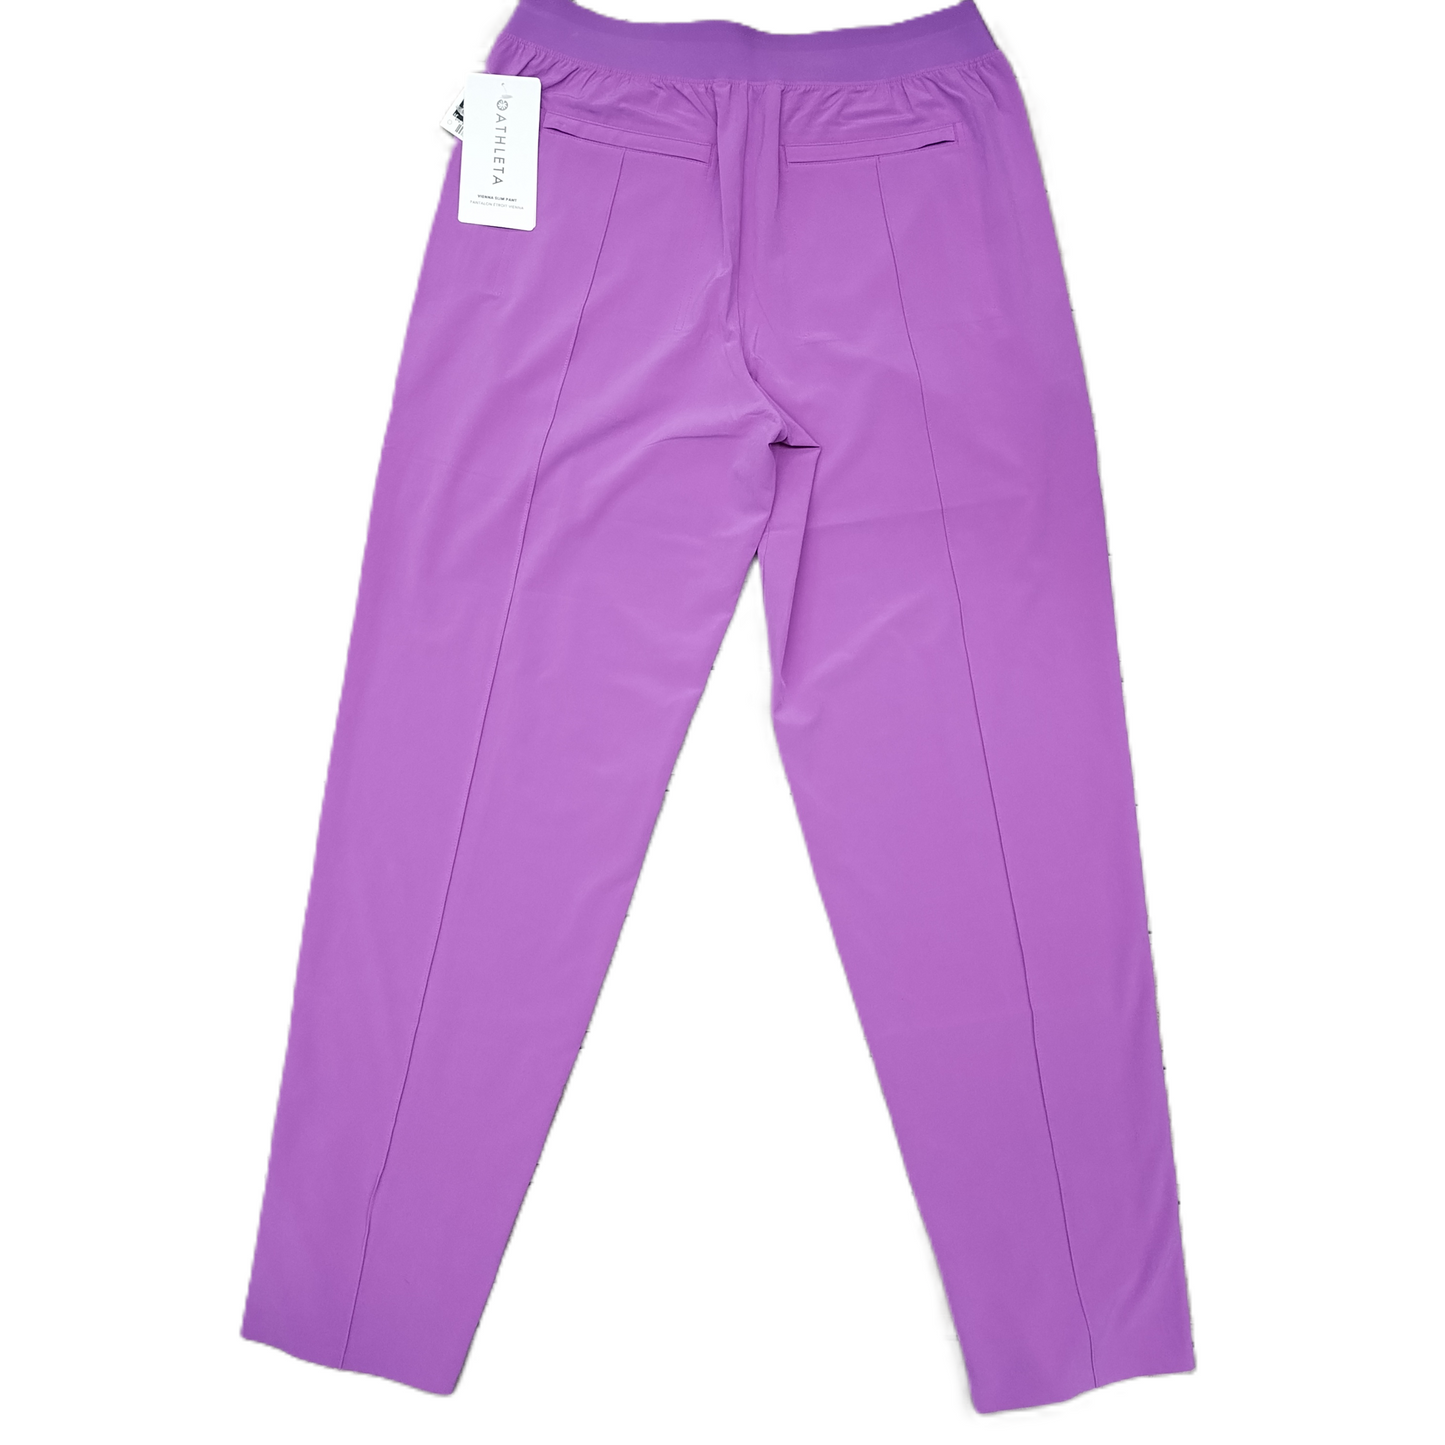 Pants Other By Athleta  Size: 6